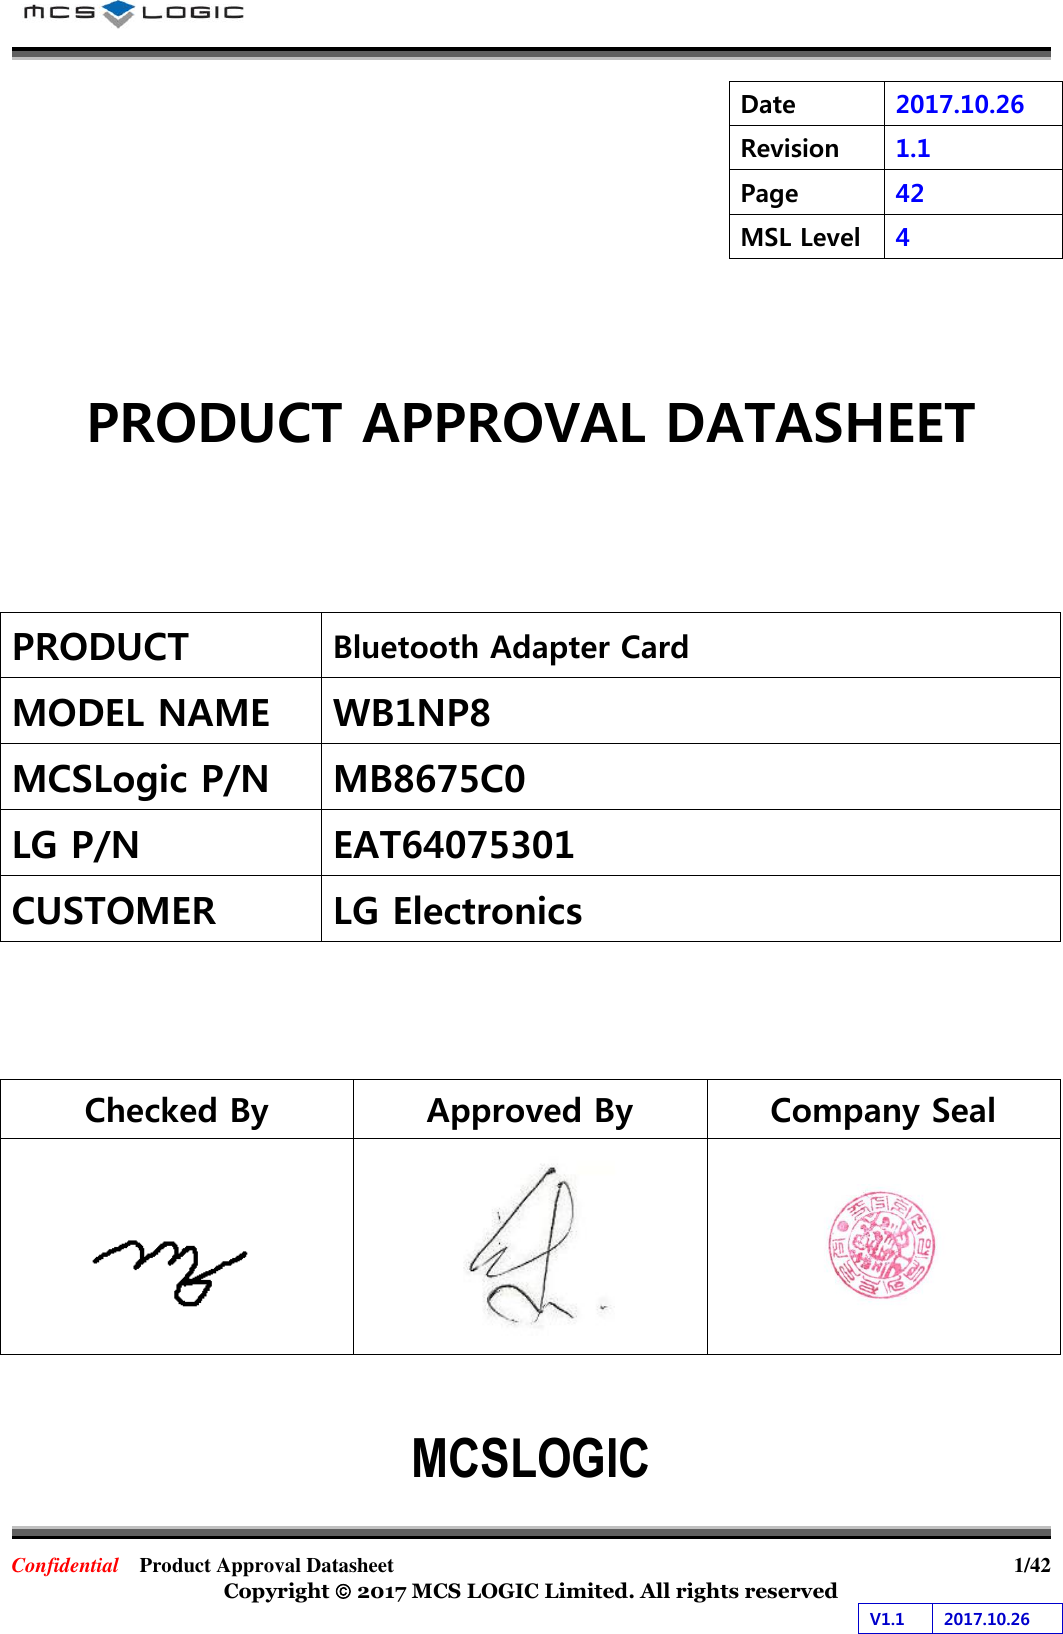 Confidential  Product Approval Datasheet  1/42 Copyright  2017 MCS LOGIC Limited. All rights reserved V1.1 2017.10.26 Date 2017.10.26 Revision 1.1 Page 42 MSL Level 4 PRODUCT APPROVAL DATASHEET PRODUCTBluetooth Adapter Card MODEL NAMEWB1NP8 MCSLogic P/N MB8675C0 LG P/N EAT64075301 CUSTOMERLG Electronics Checked By Approved By Company Seal MCSLOGIC 